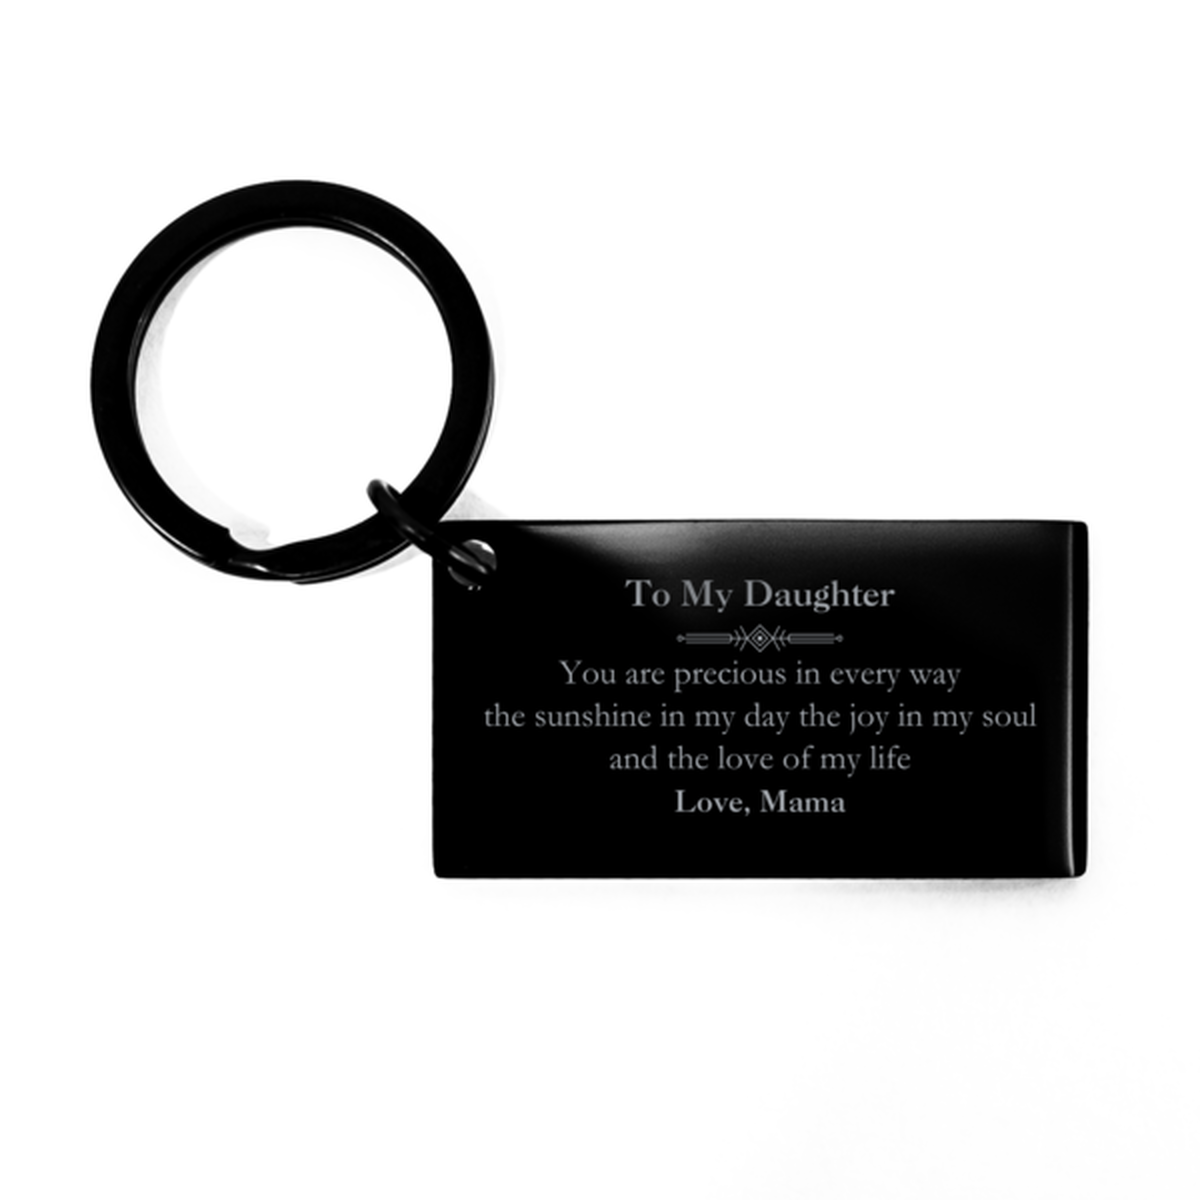 Graduation Gifts for Daughter Keychain Present from Mama, Christmas Daughter Birthday Gifts Daughter You are precious in every way the sunshine in my day. Love, Mama